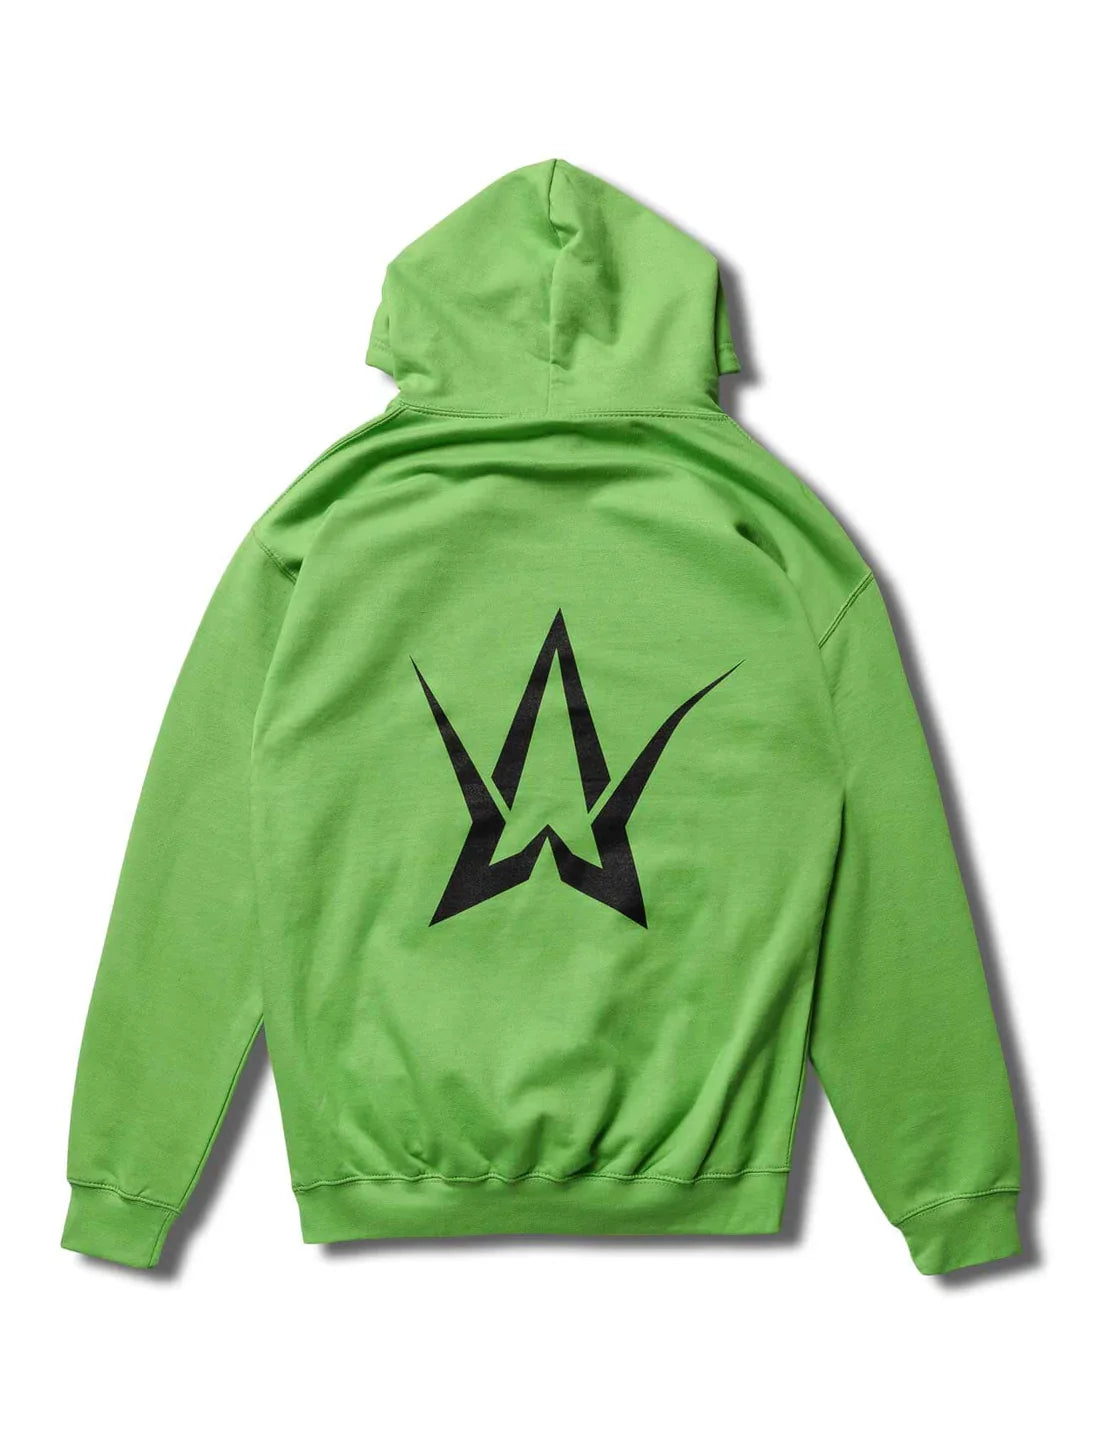 Back view of the eye-catching green Alan Walker Hoodie featuring the bold Walkerverse emblem.